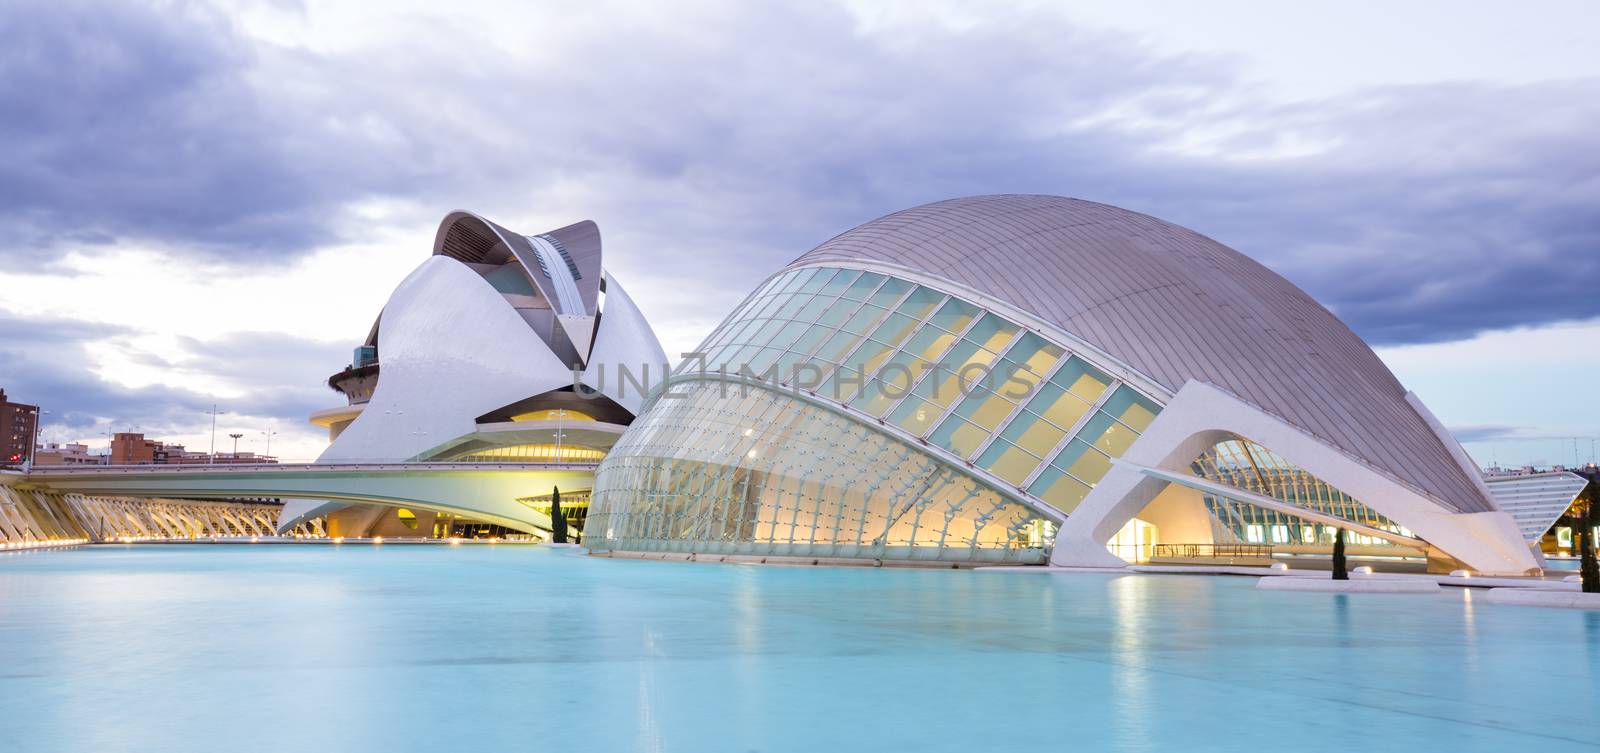 City of the Arts and Sciences in Valencia, Spain. by kasto